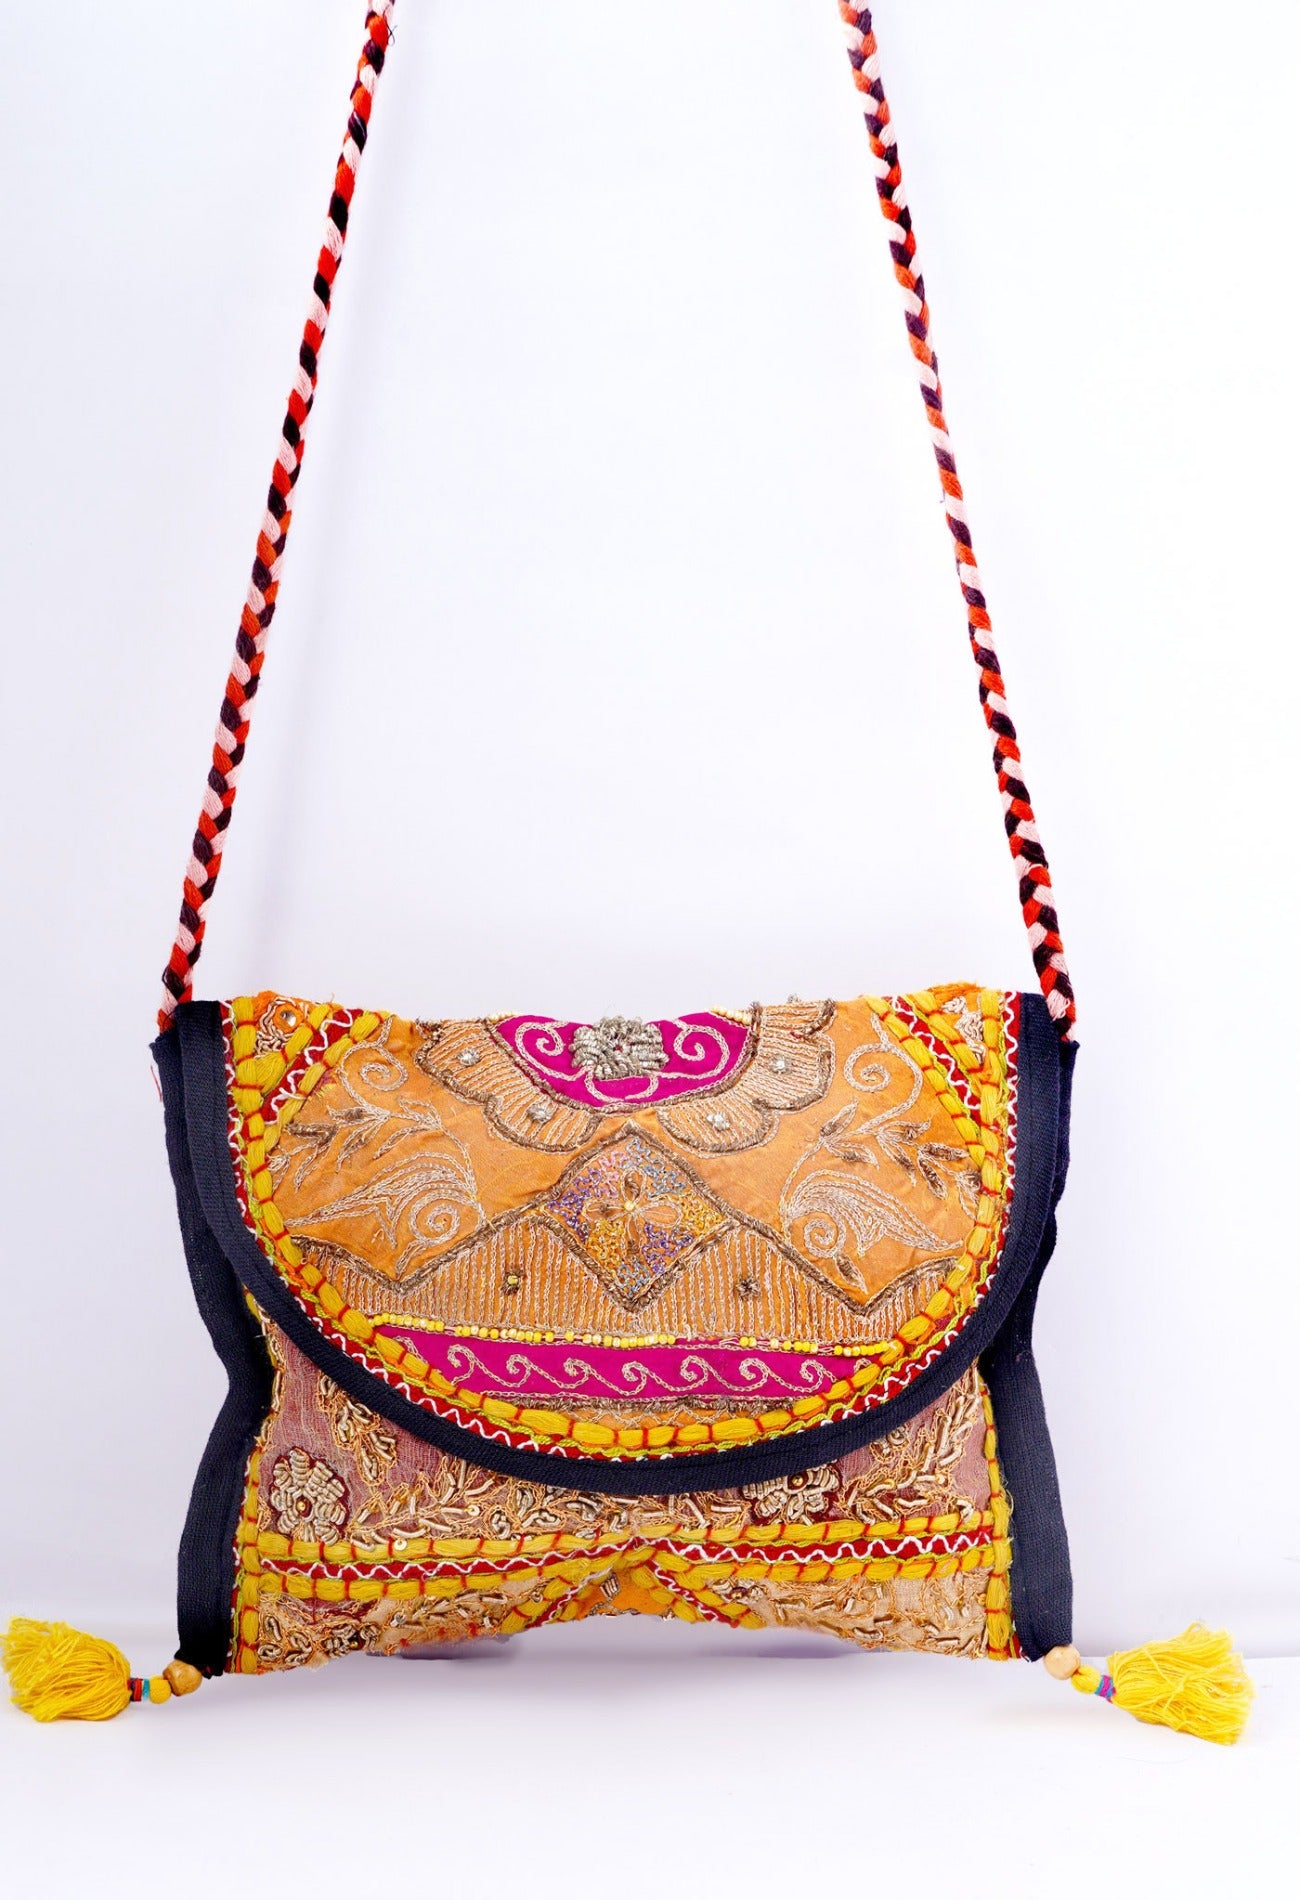 Online Shopping for Yellow Indian Handicraft Embroidered Hand Bag with Weaving from Rajasthan at Unnatisilks.com India_x000D_
Online Shopping for Yellow Indian Handicraft Embroidered Hand Bag with Weaving from Rajasthan at Unnatisilks.com India_x000D_
